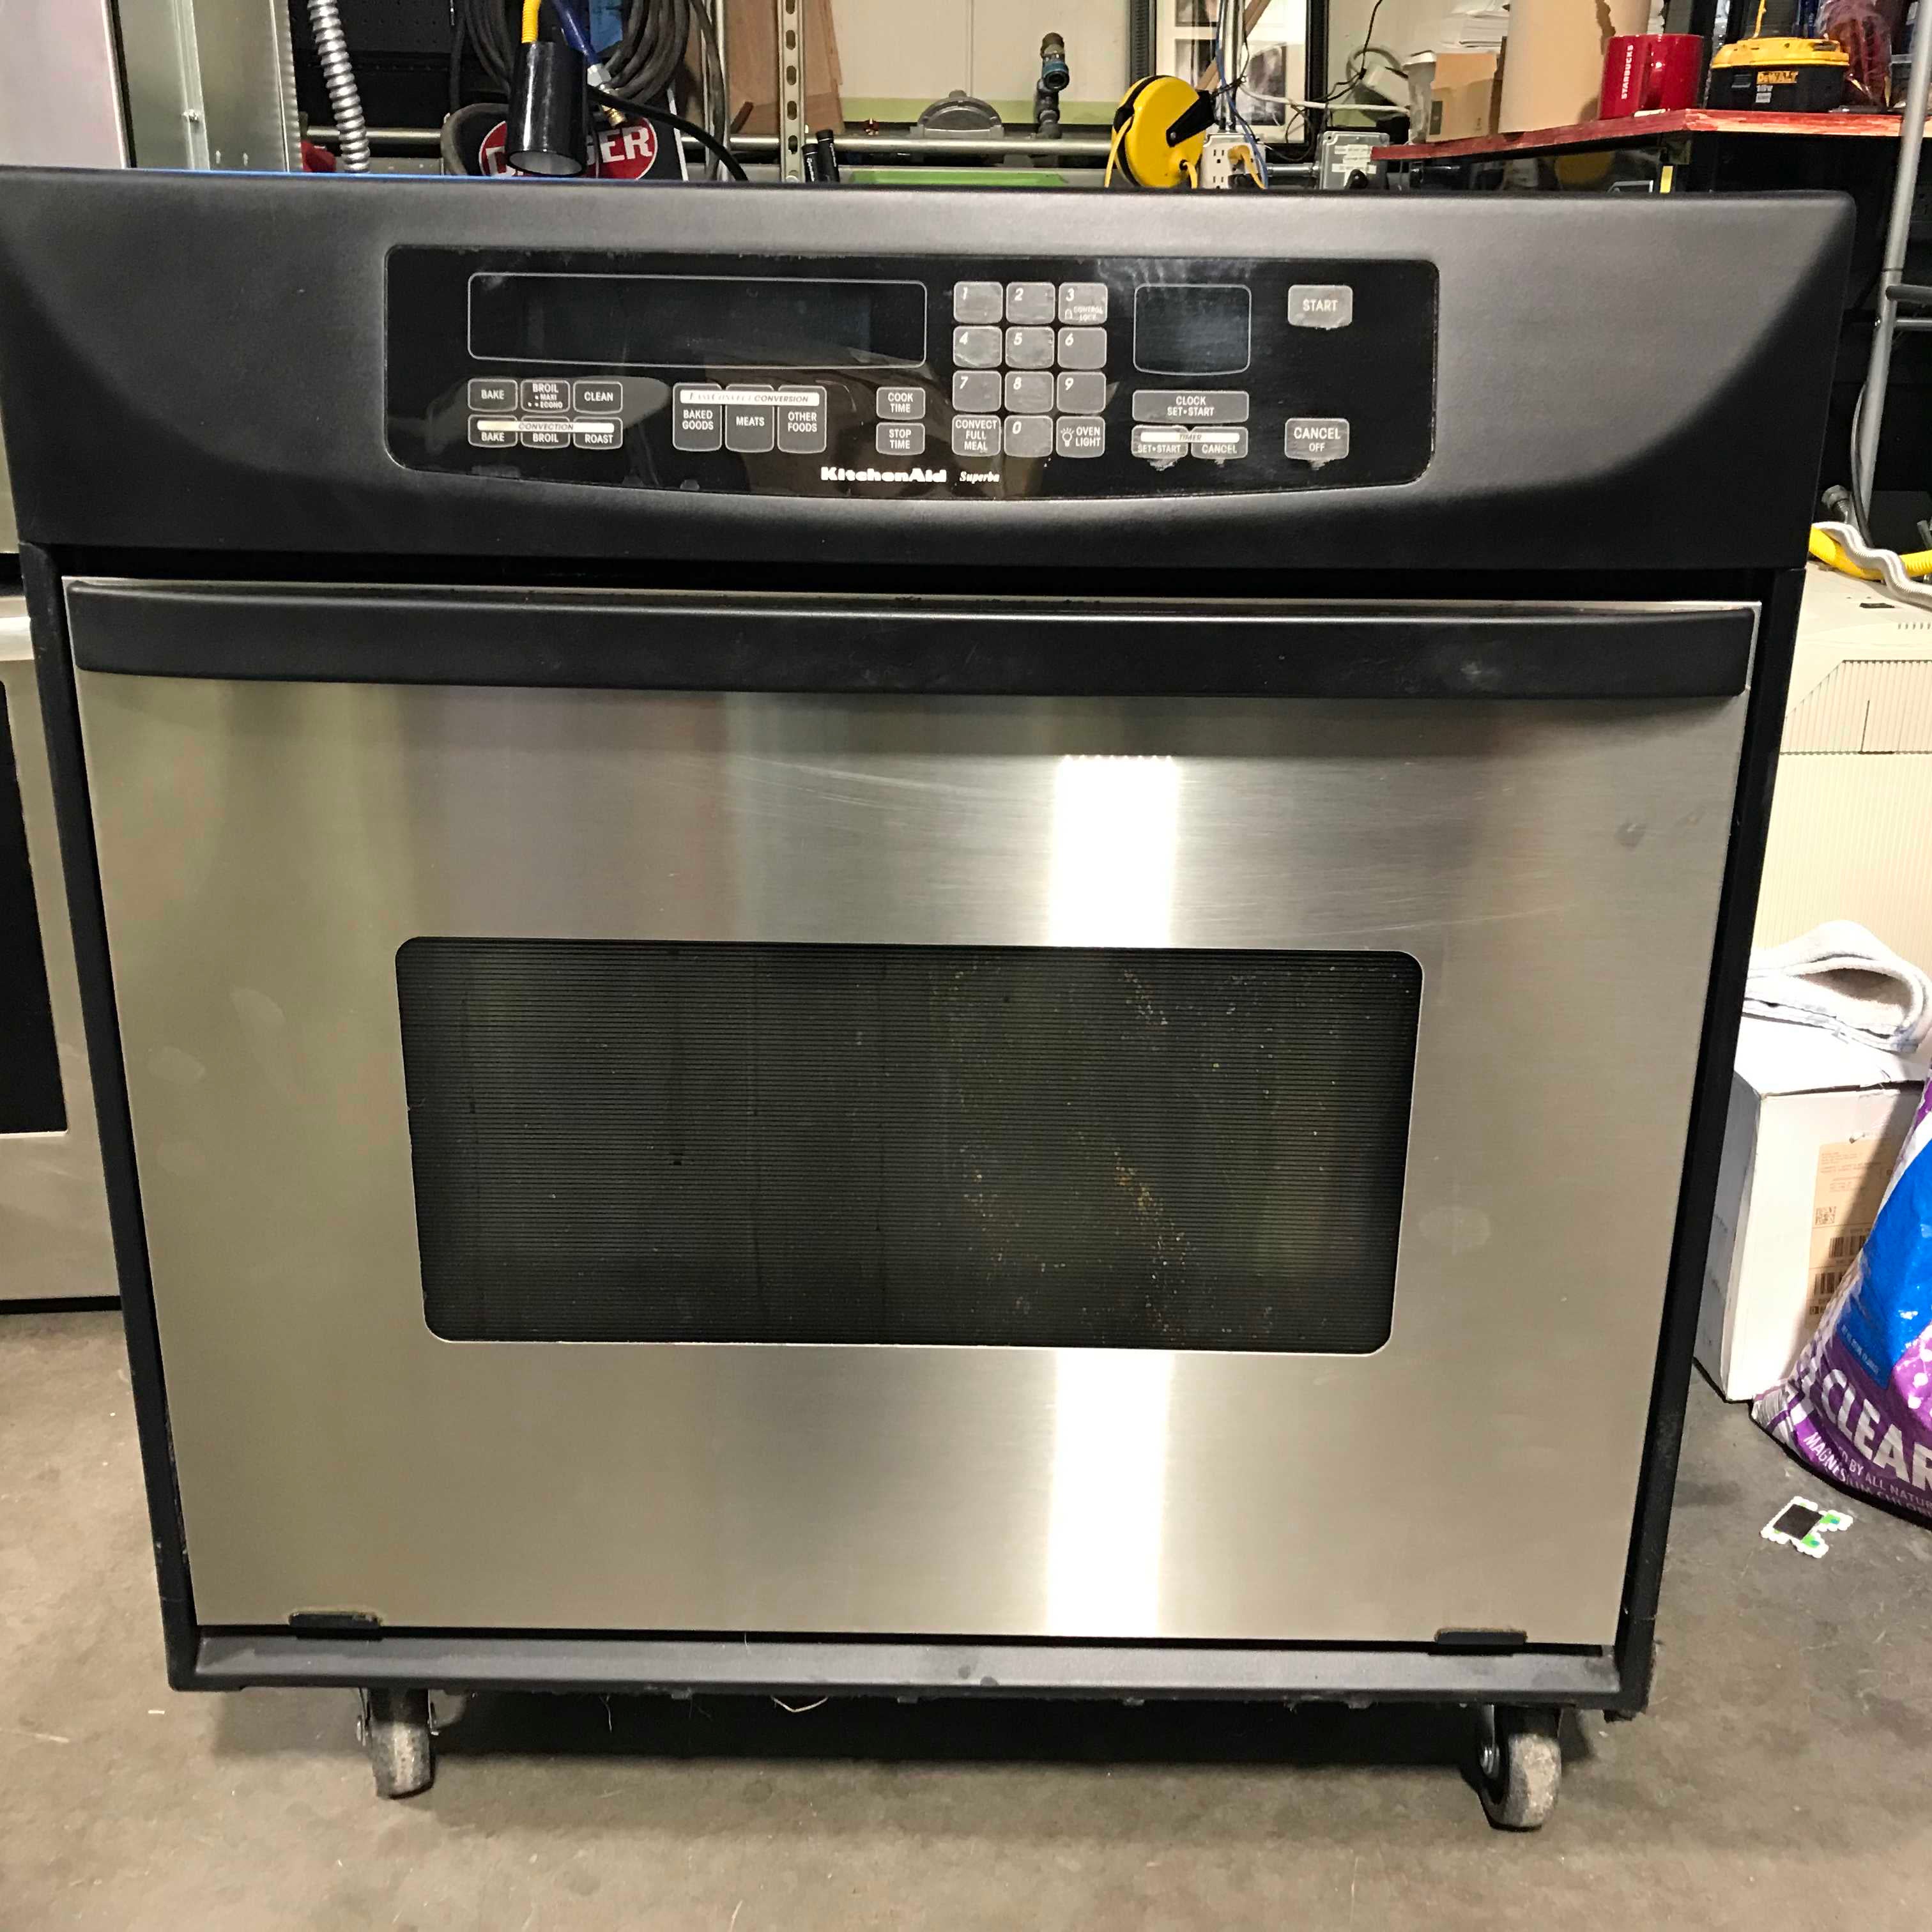 Stainless Steel KitchenAid Wall Oven